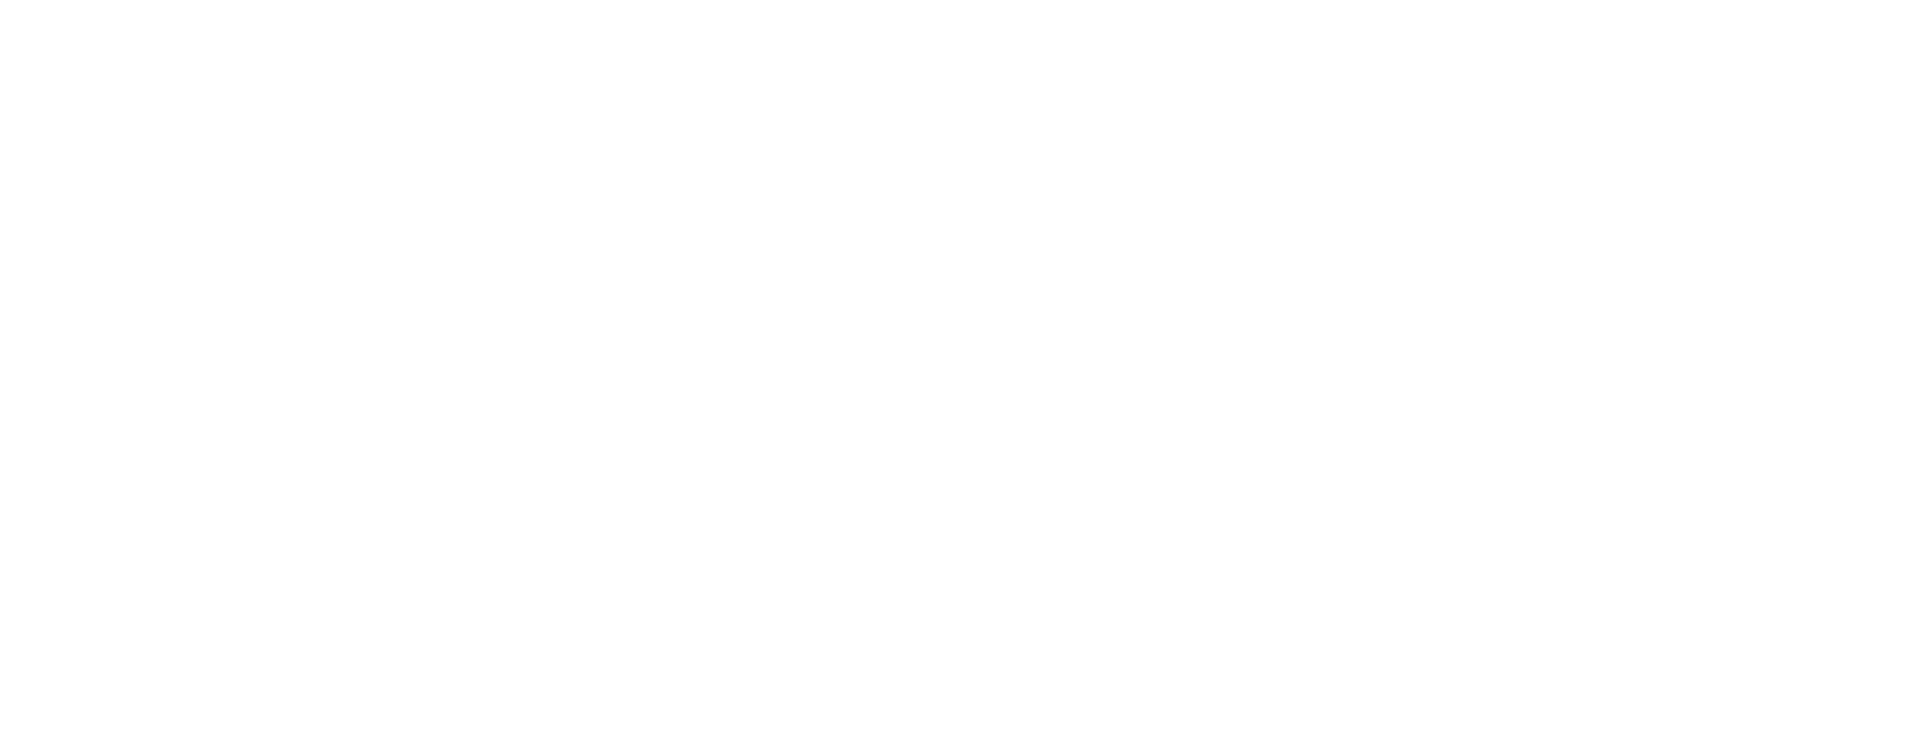 Enter a State of Phil decorative text